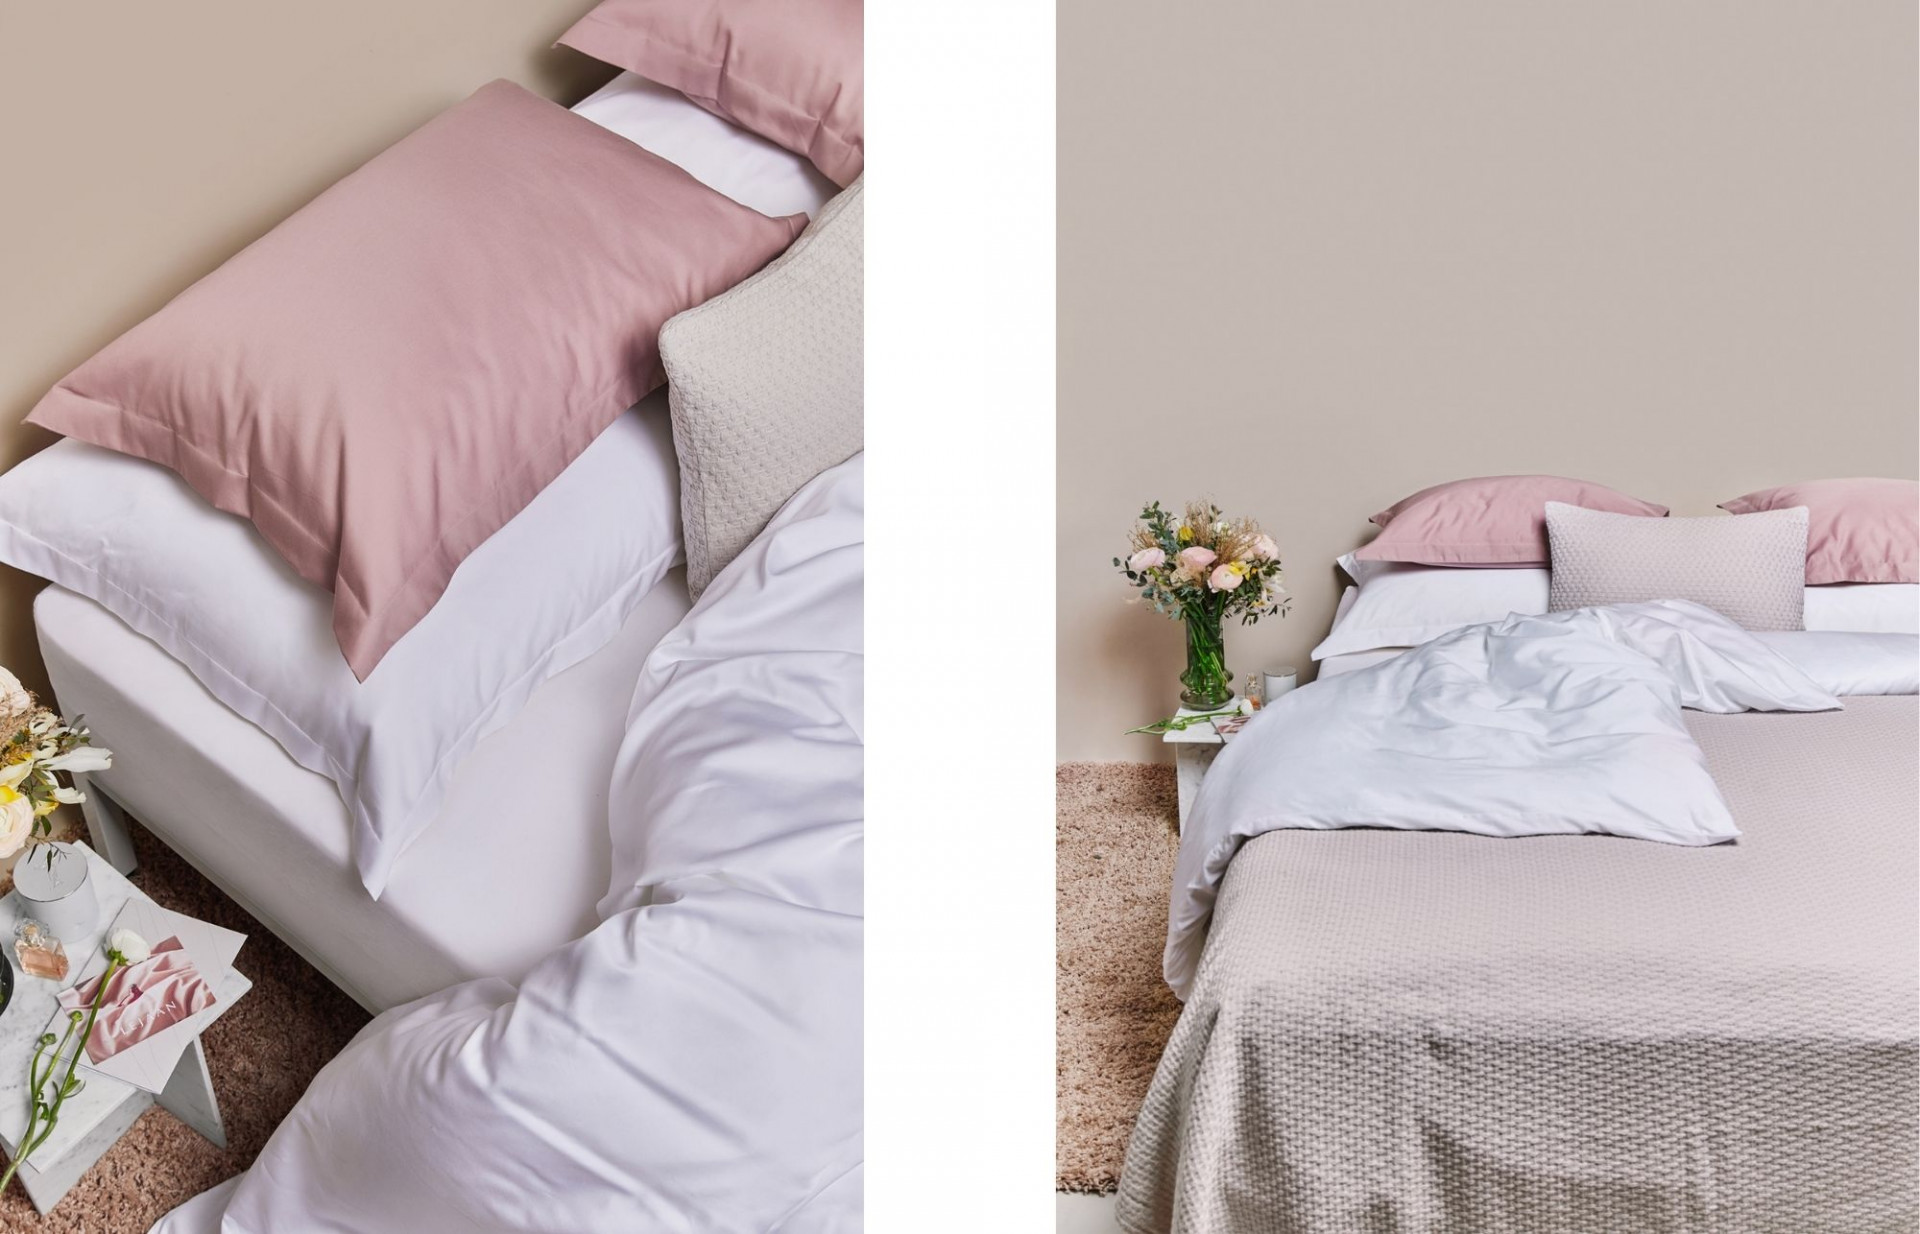 You can’t go wrong by pairing white with pink. The calm tones of Never Too Late with the brilliant white Quiet Jungle promise a winning combo.